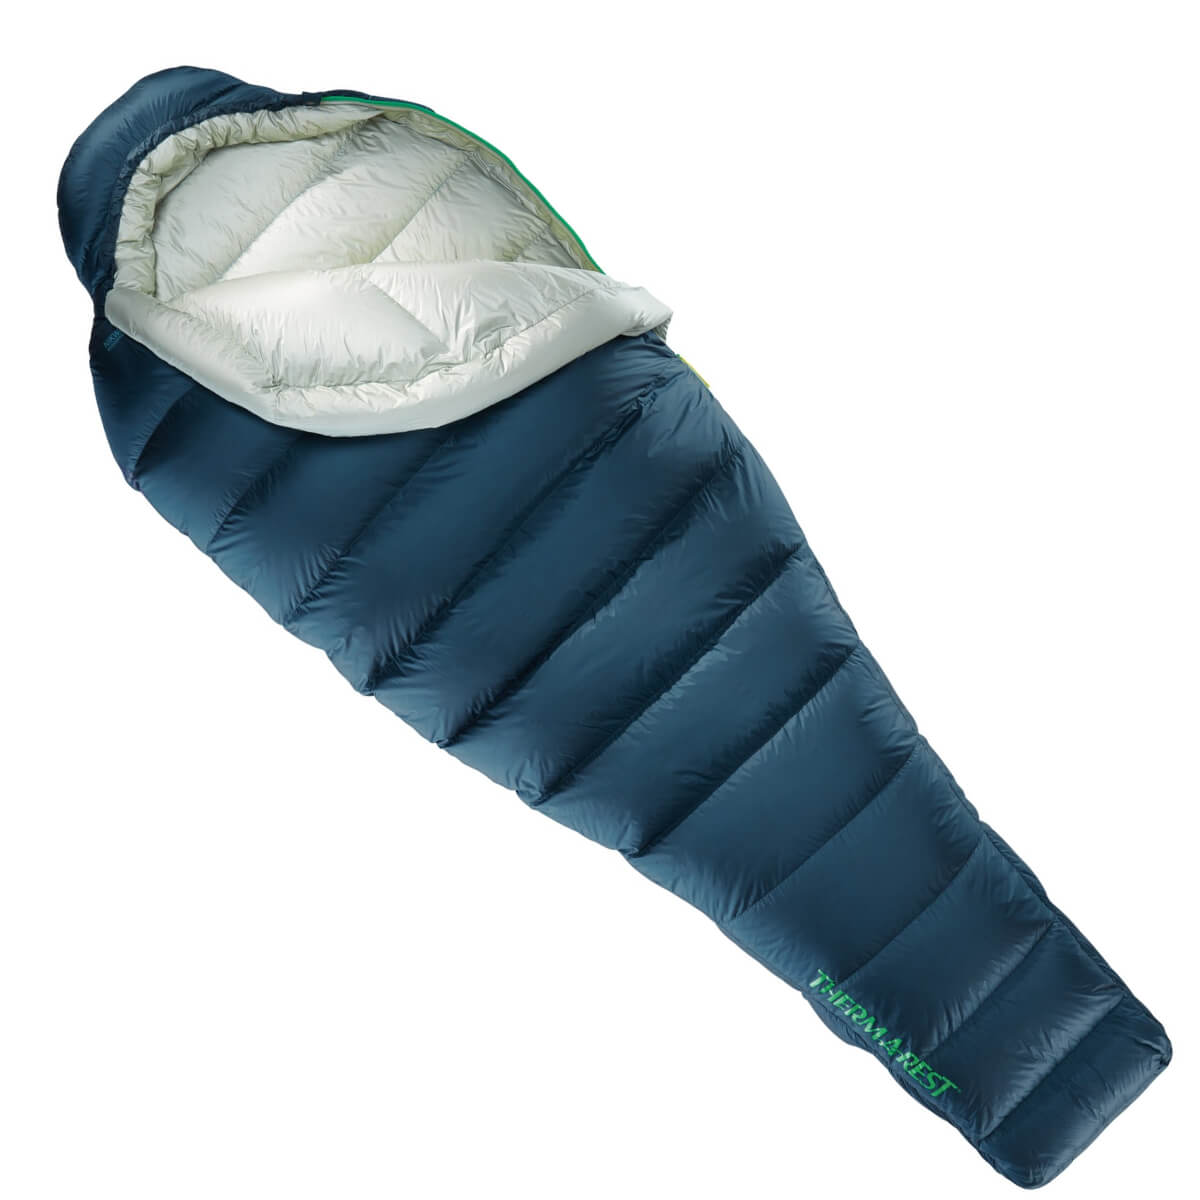 Therm-a-Rest Hyperion as a hiking gift idea